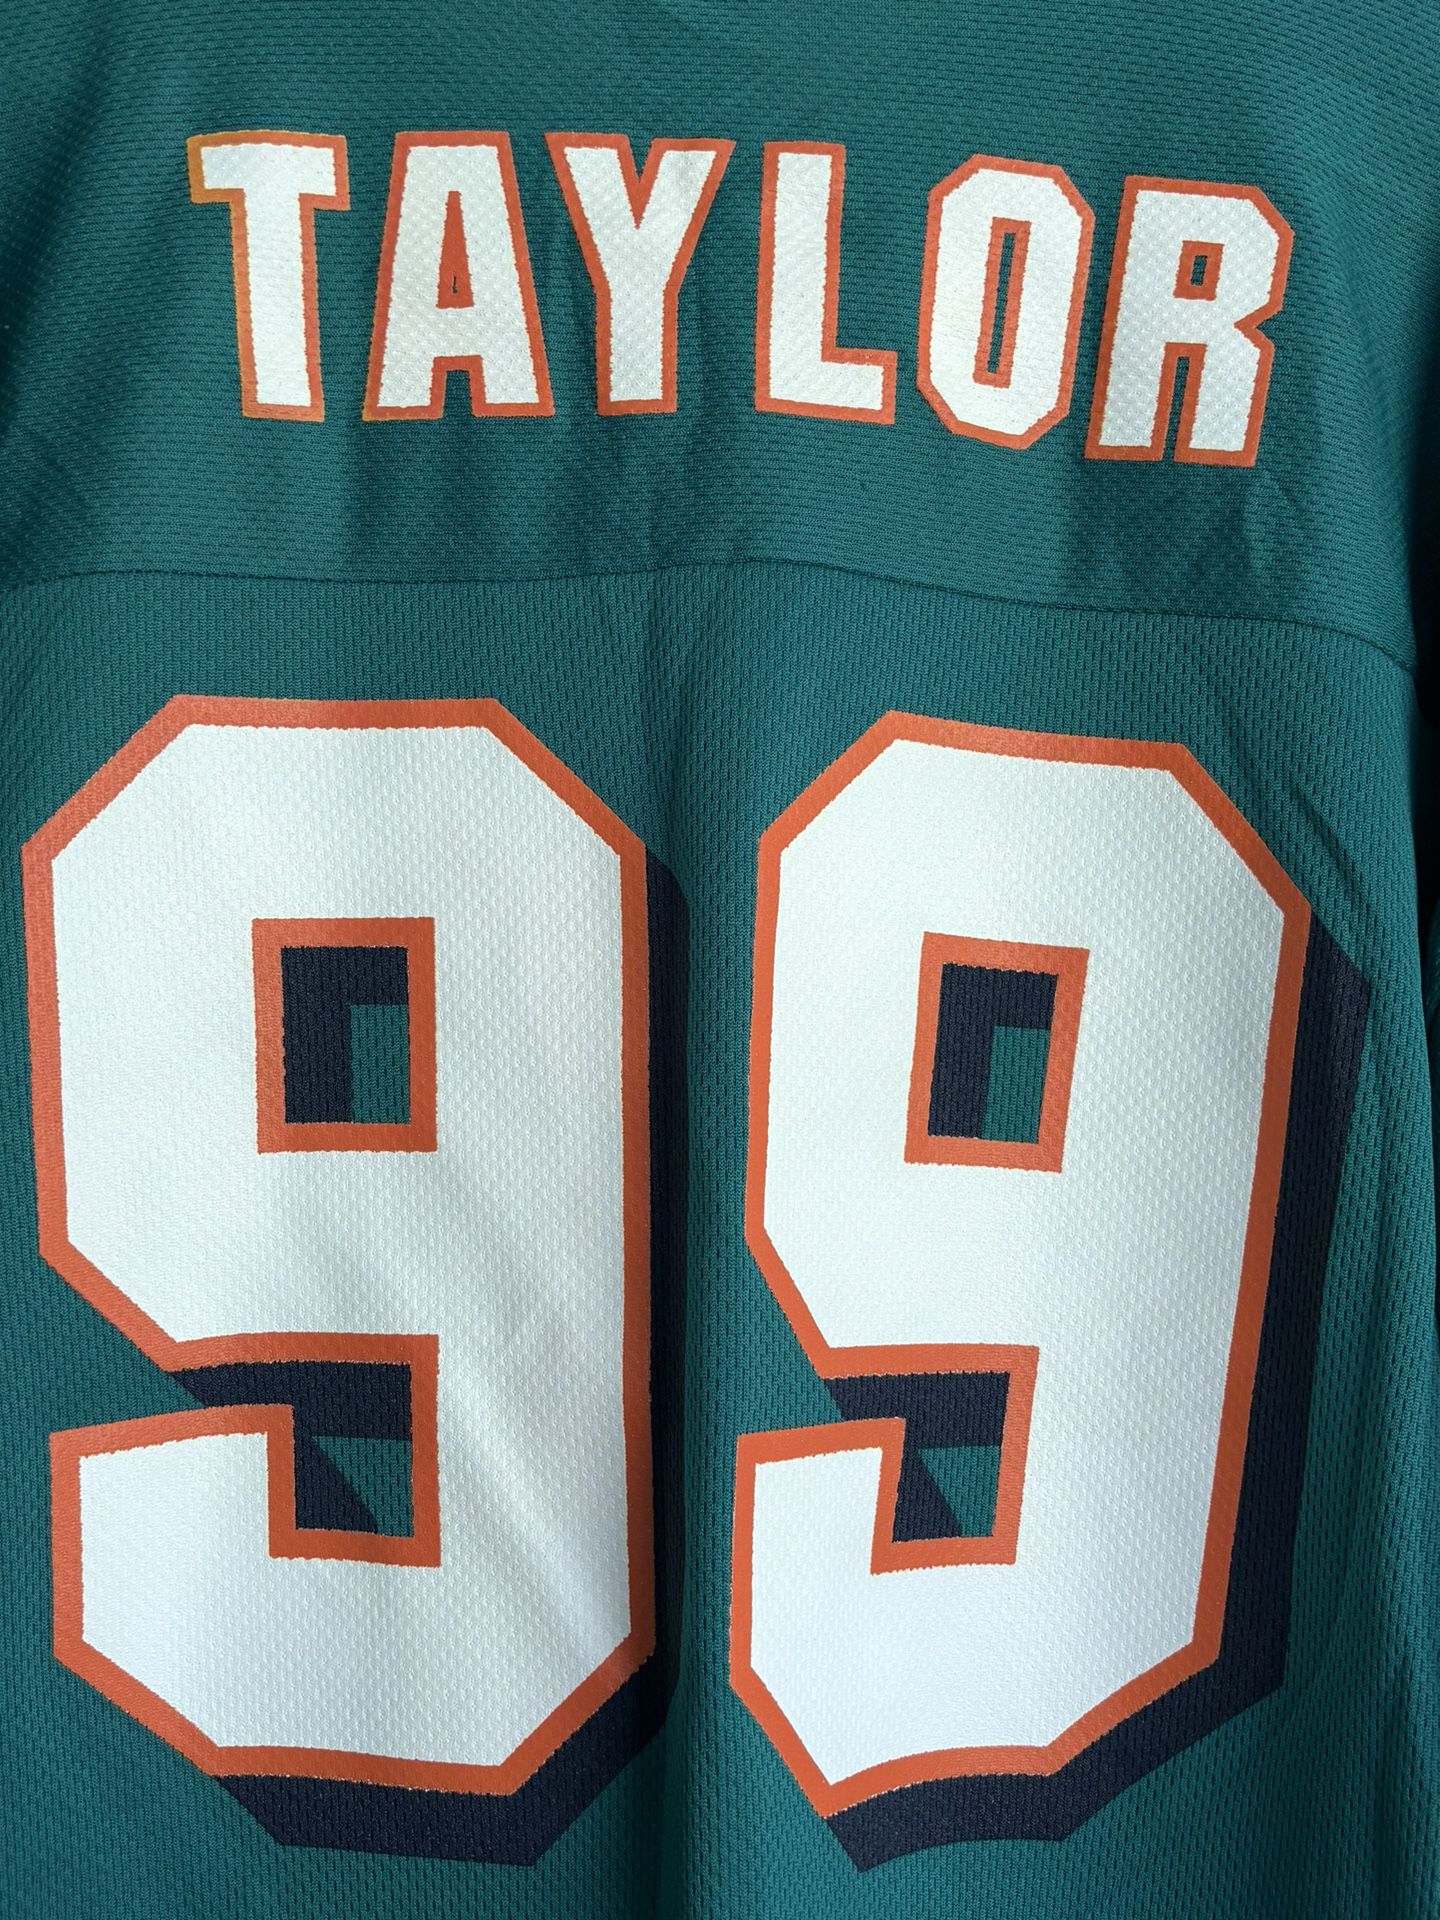 Miami Hurricanes#99 Taylor NFL Jersey